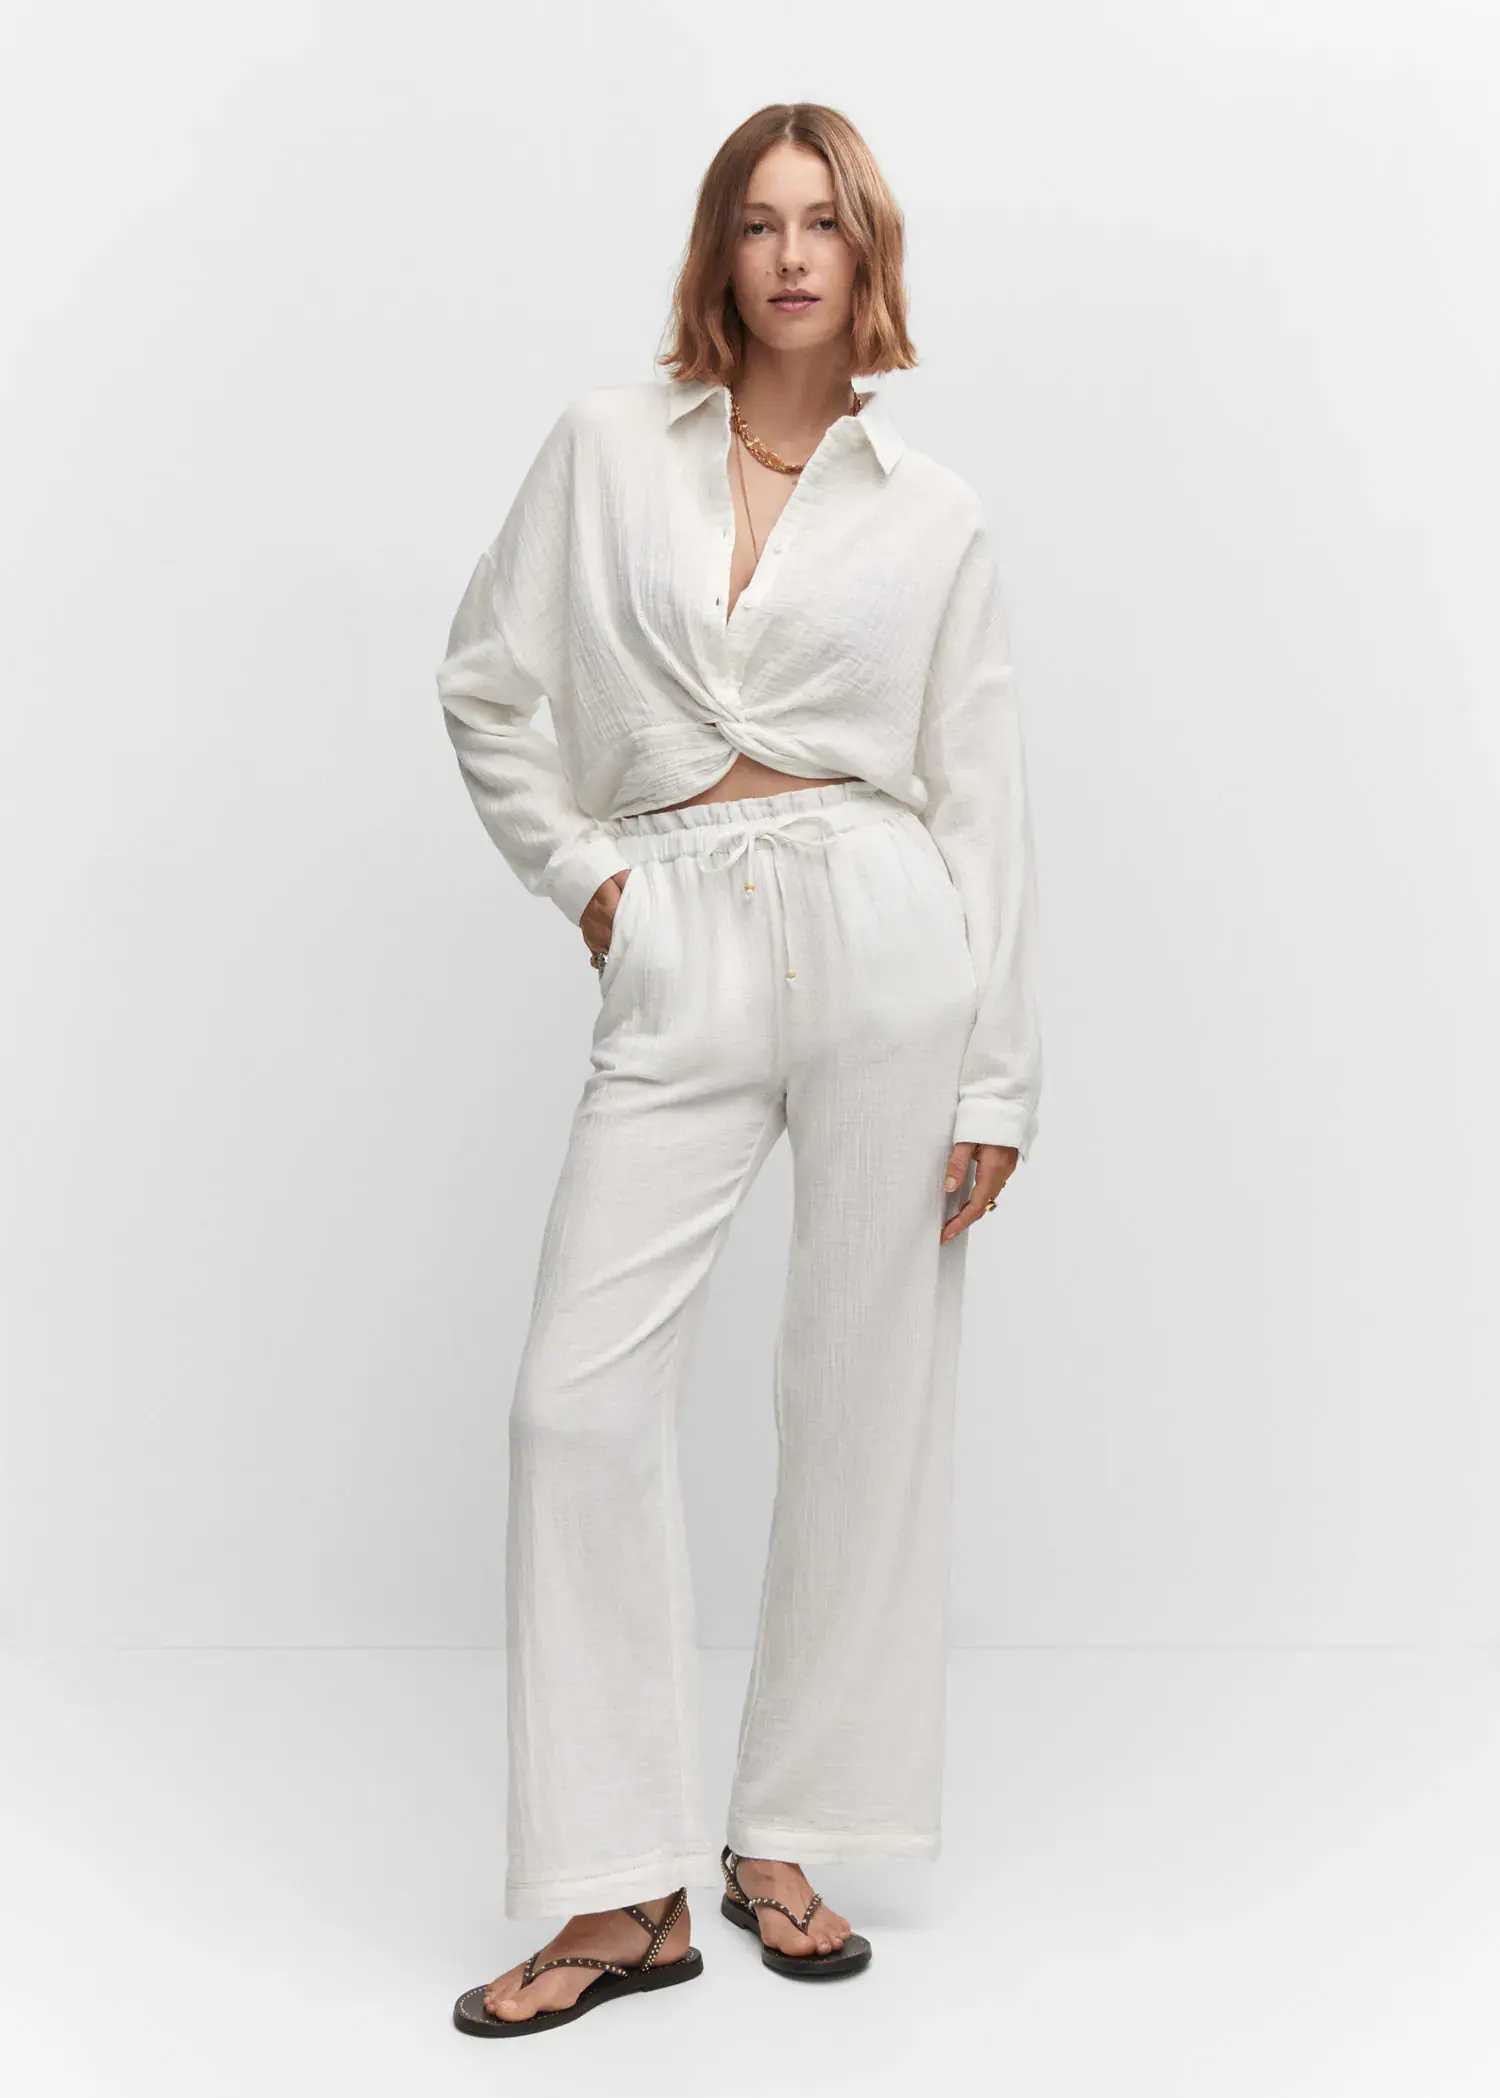 Mango Bow textured trousers. a woman in white shirt and pants standing in a room. 